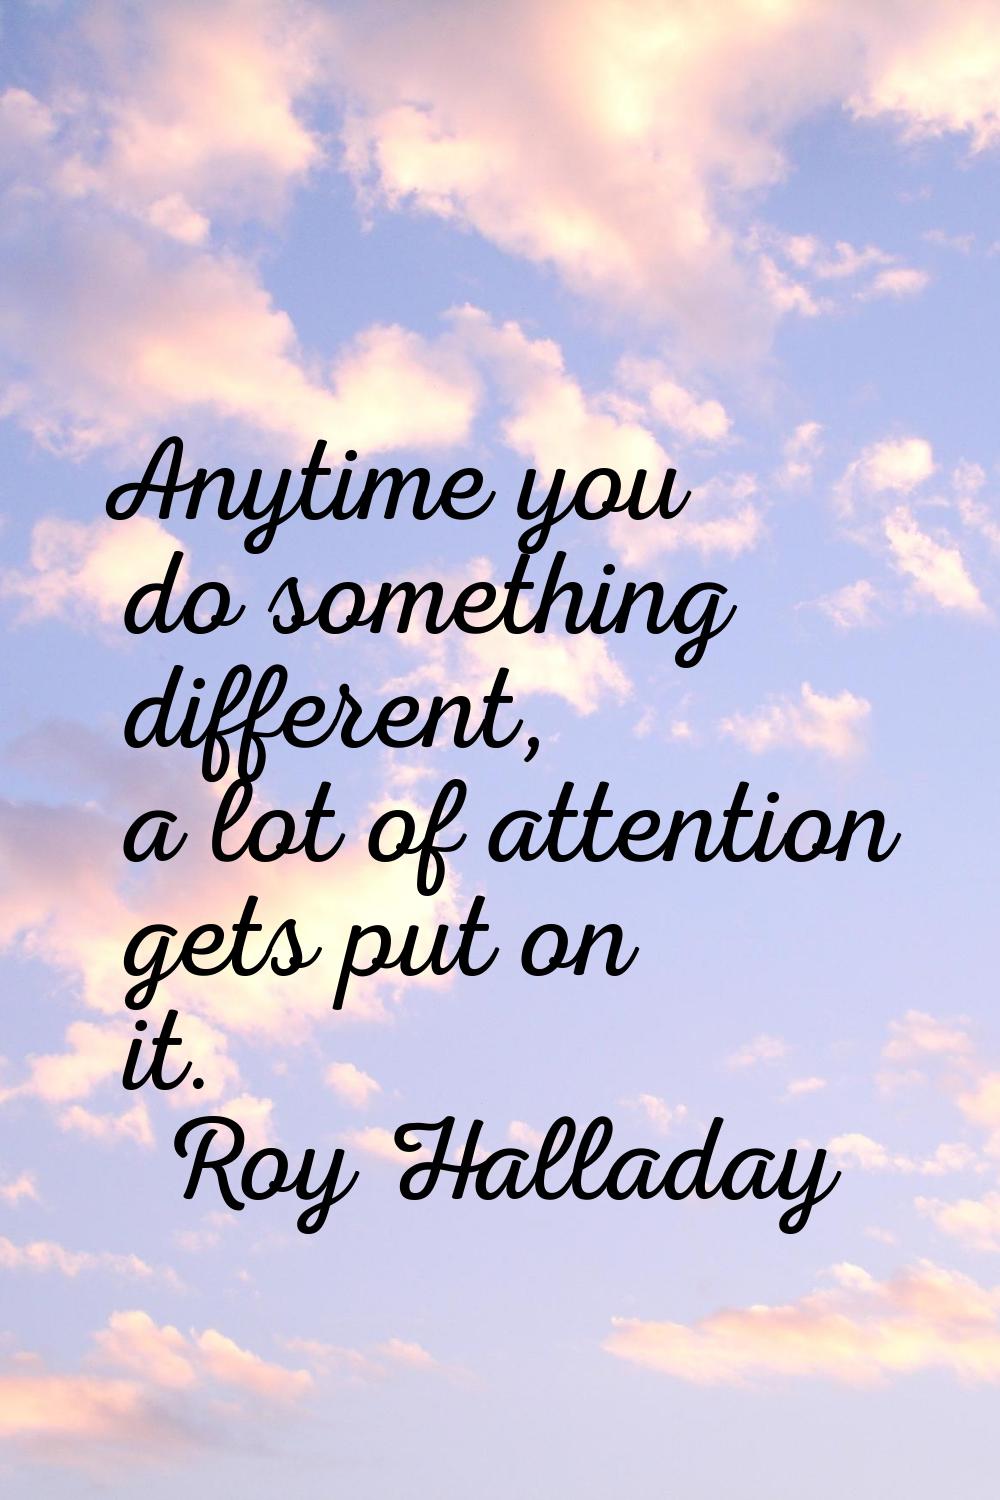 Anytime you do something different, a lot of attention gets put on it.